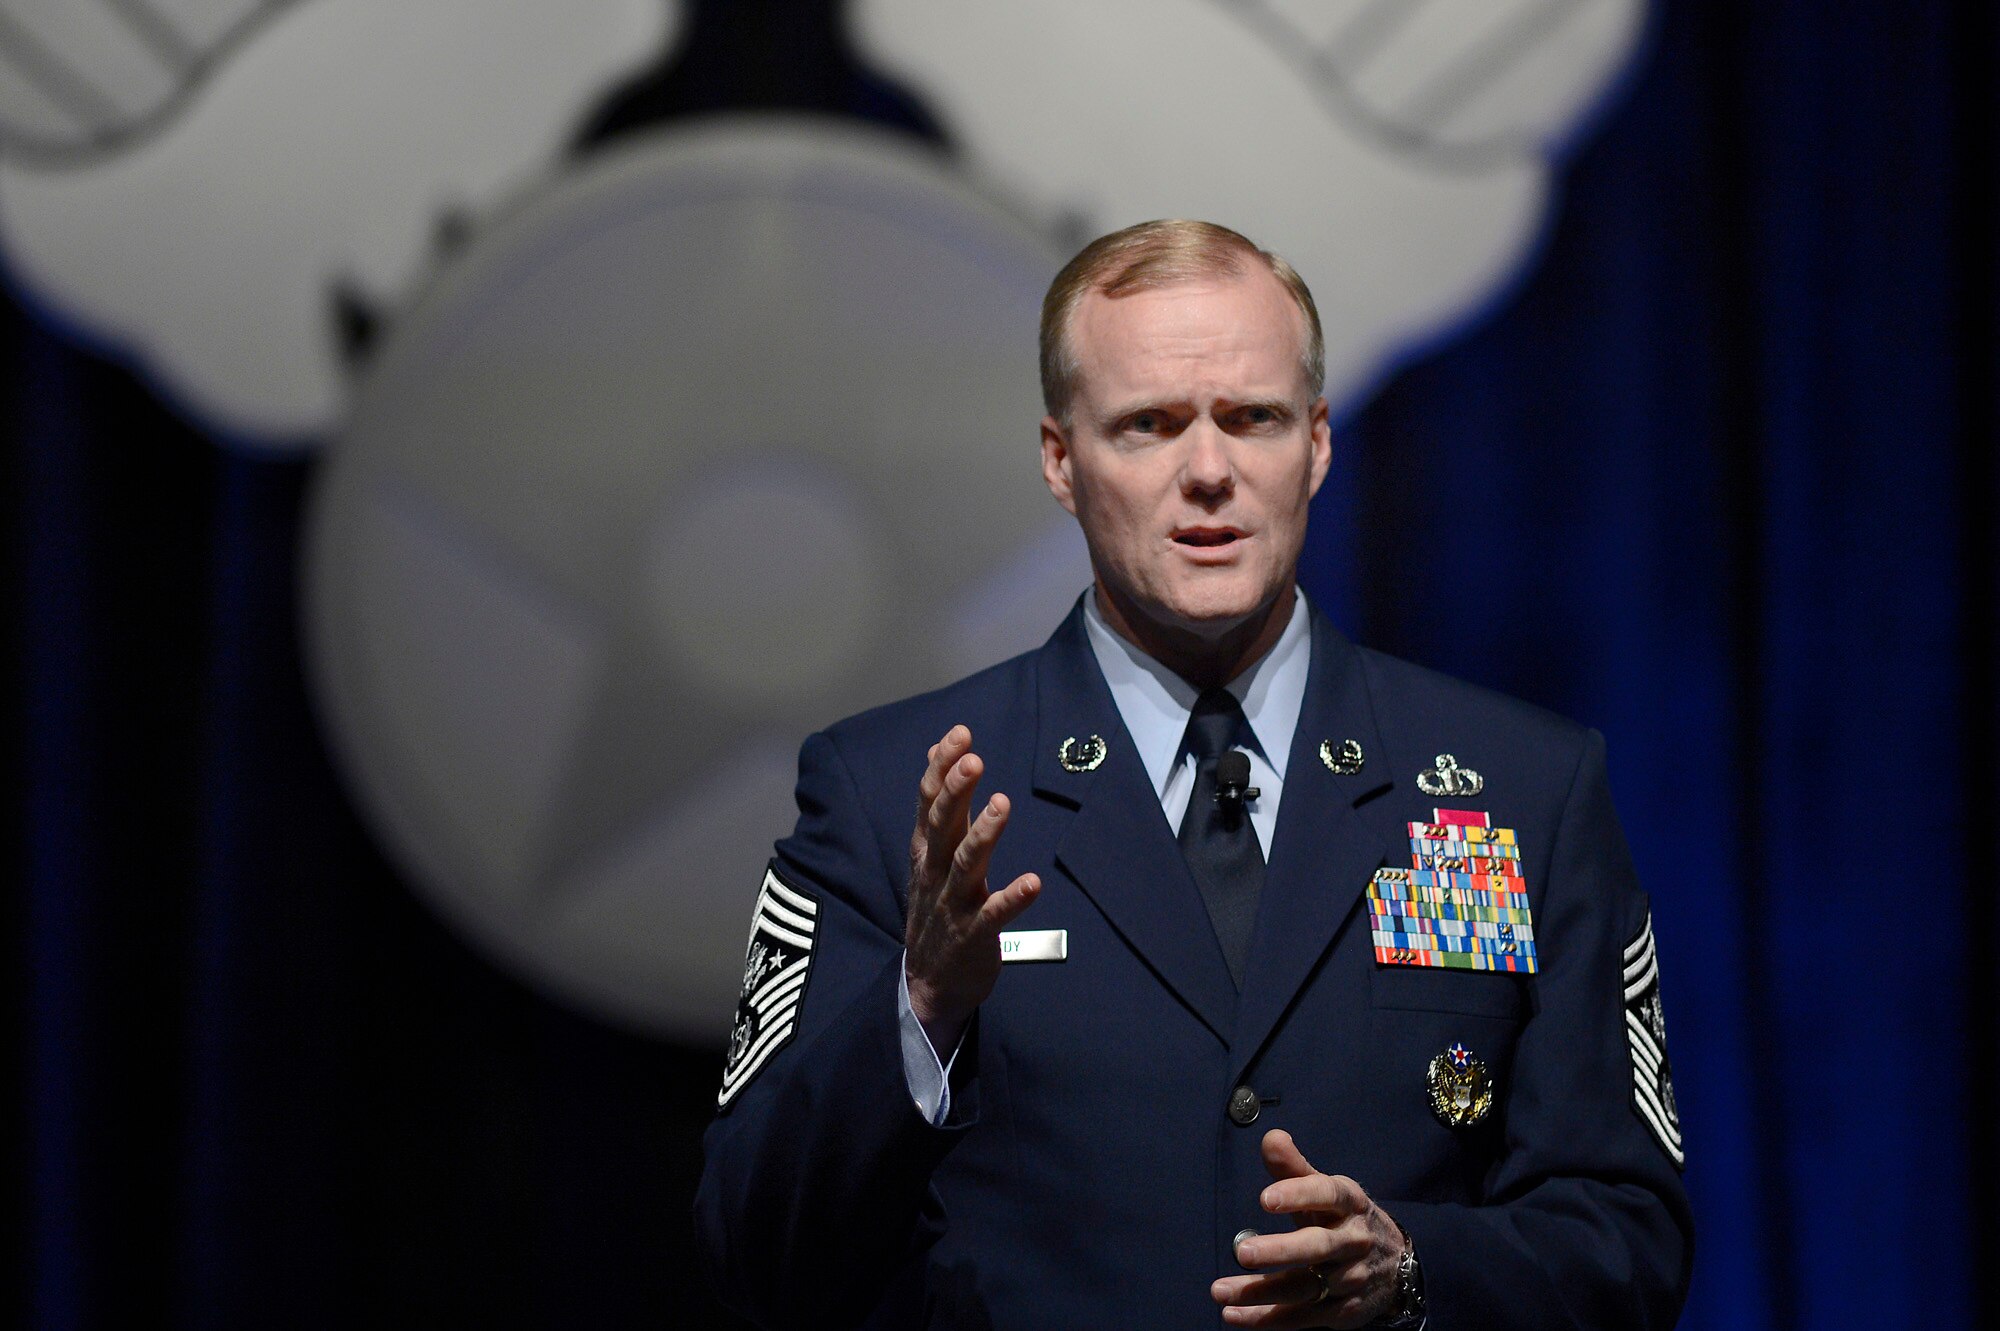 Chief Master Sgt. of the Air Force James A. Cody delivers the enlisted perspective at the 30th Annual Air Force Association Air Warfare Symposium and Technology Exposition Feb. 20, 2014, in Orlando, Fla.  Cody talked about the advantage Airmen bring to the Air Force and the need to preserve that advantage in the future.  (U.S. Air Force photo/Scott M. Ash)